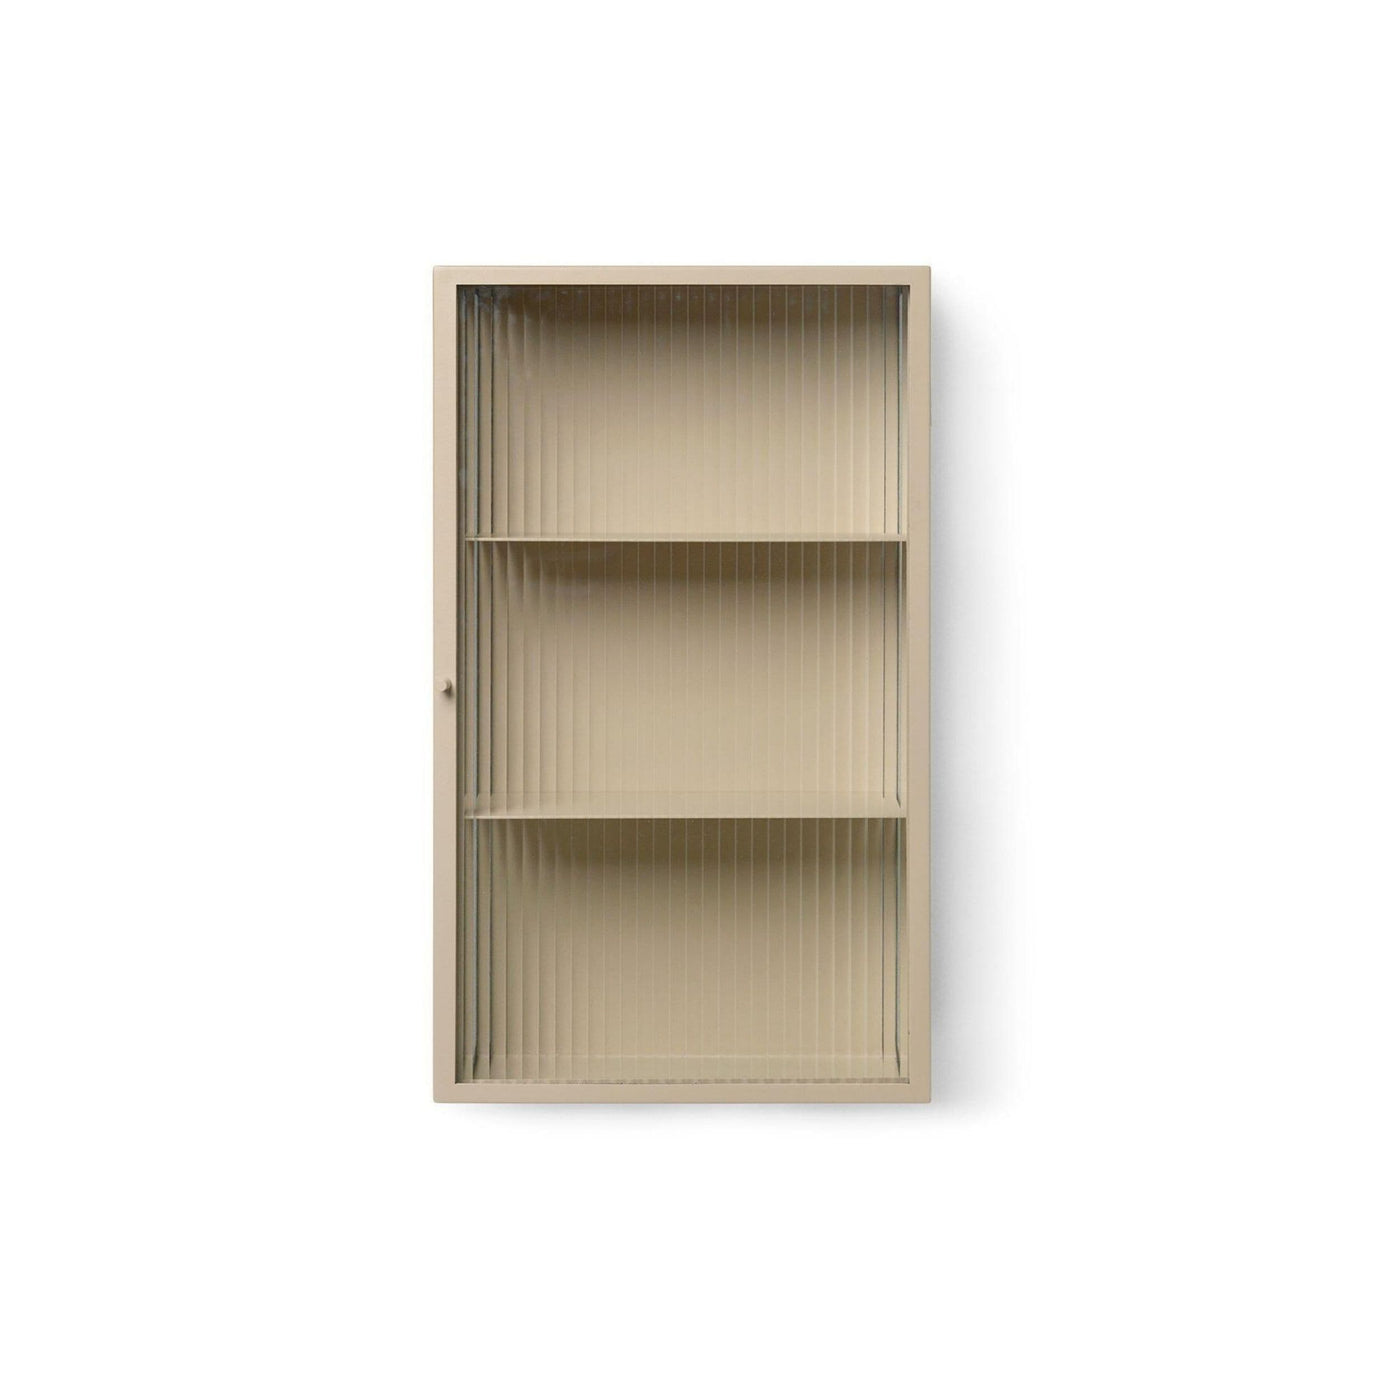 Ferm Living Haze Wall Cabinet in cashmere. Shop online at someday designs